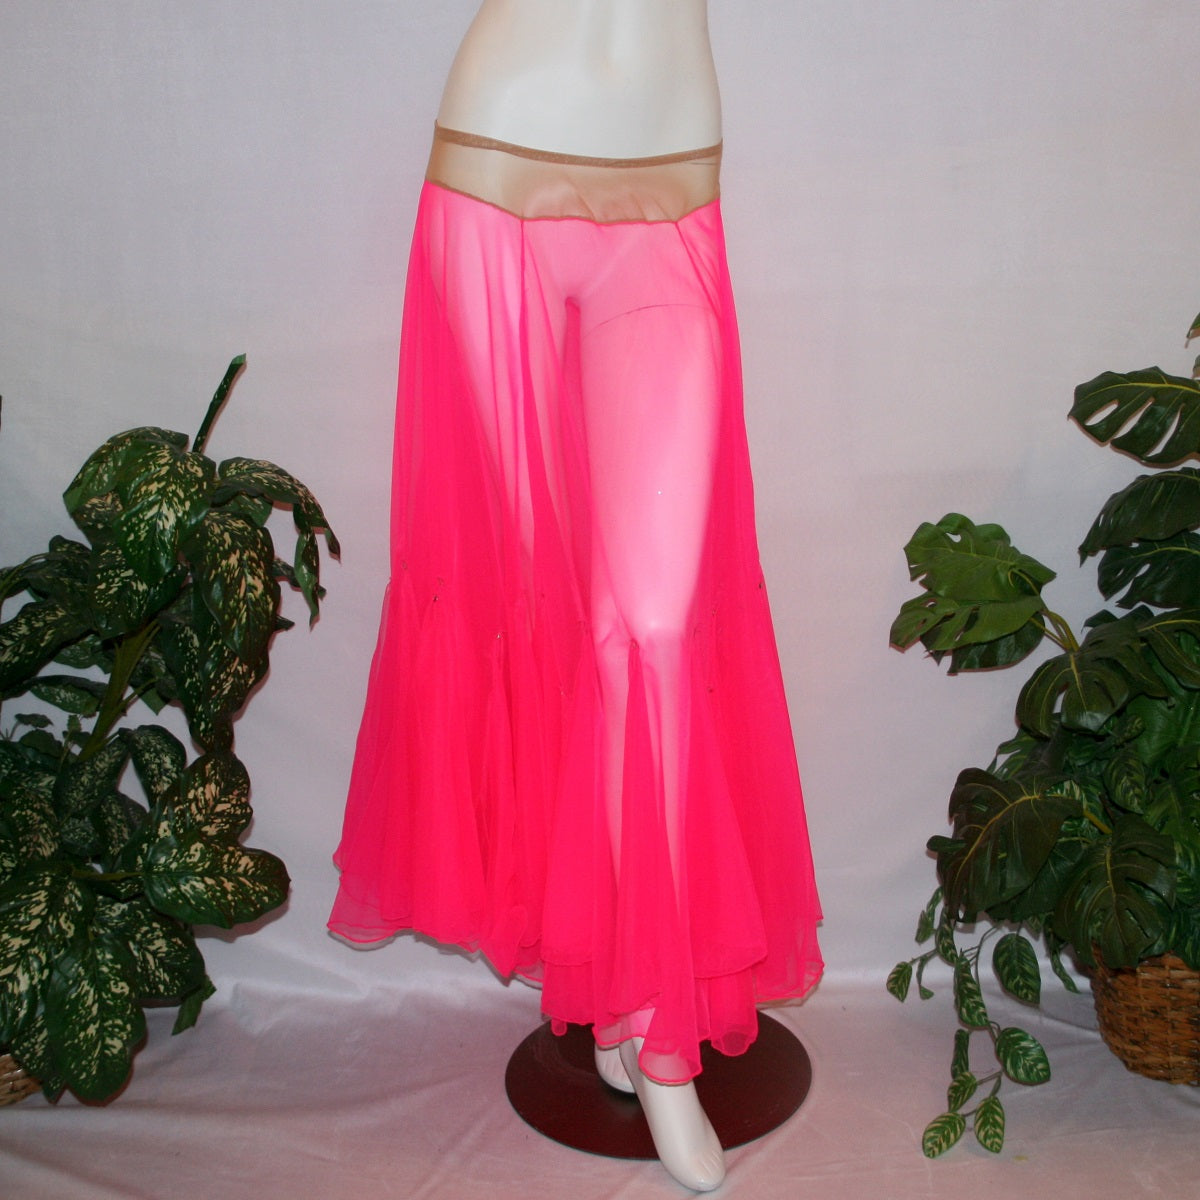 Hot pink ballroom skirt created with yards of hot pink sheer tricot with petal like floats around bottom embellished with tear drop Swarovski rhinestones.